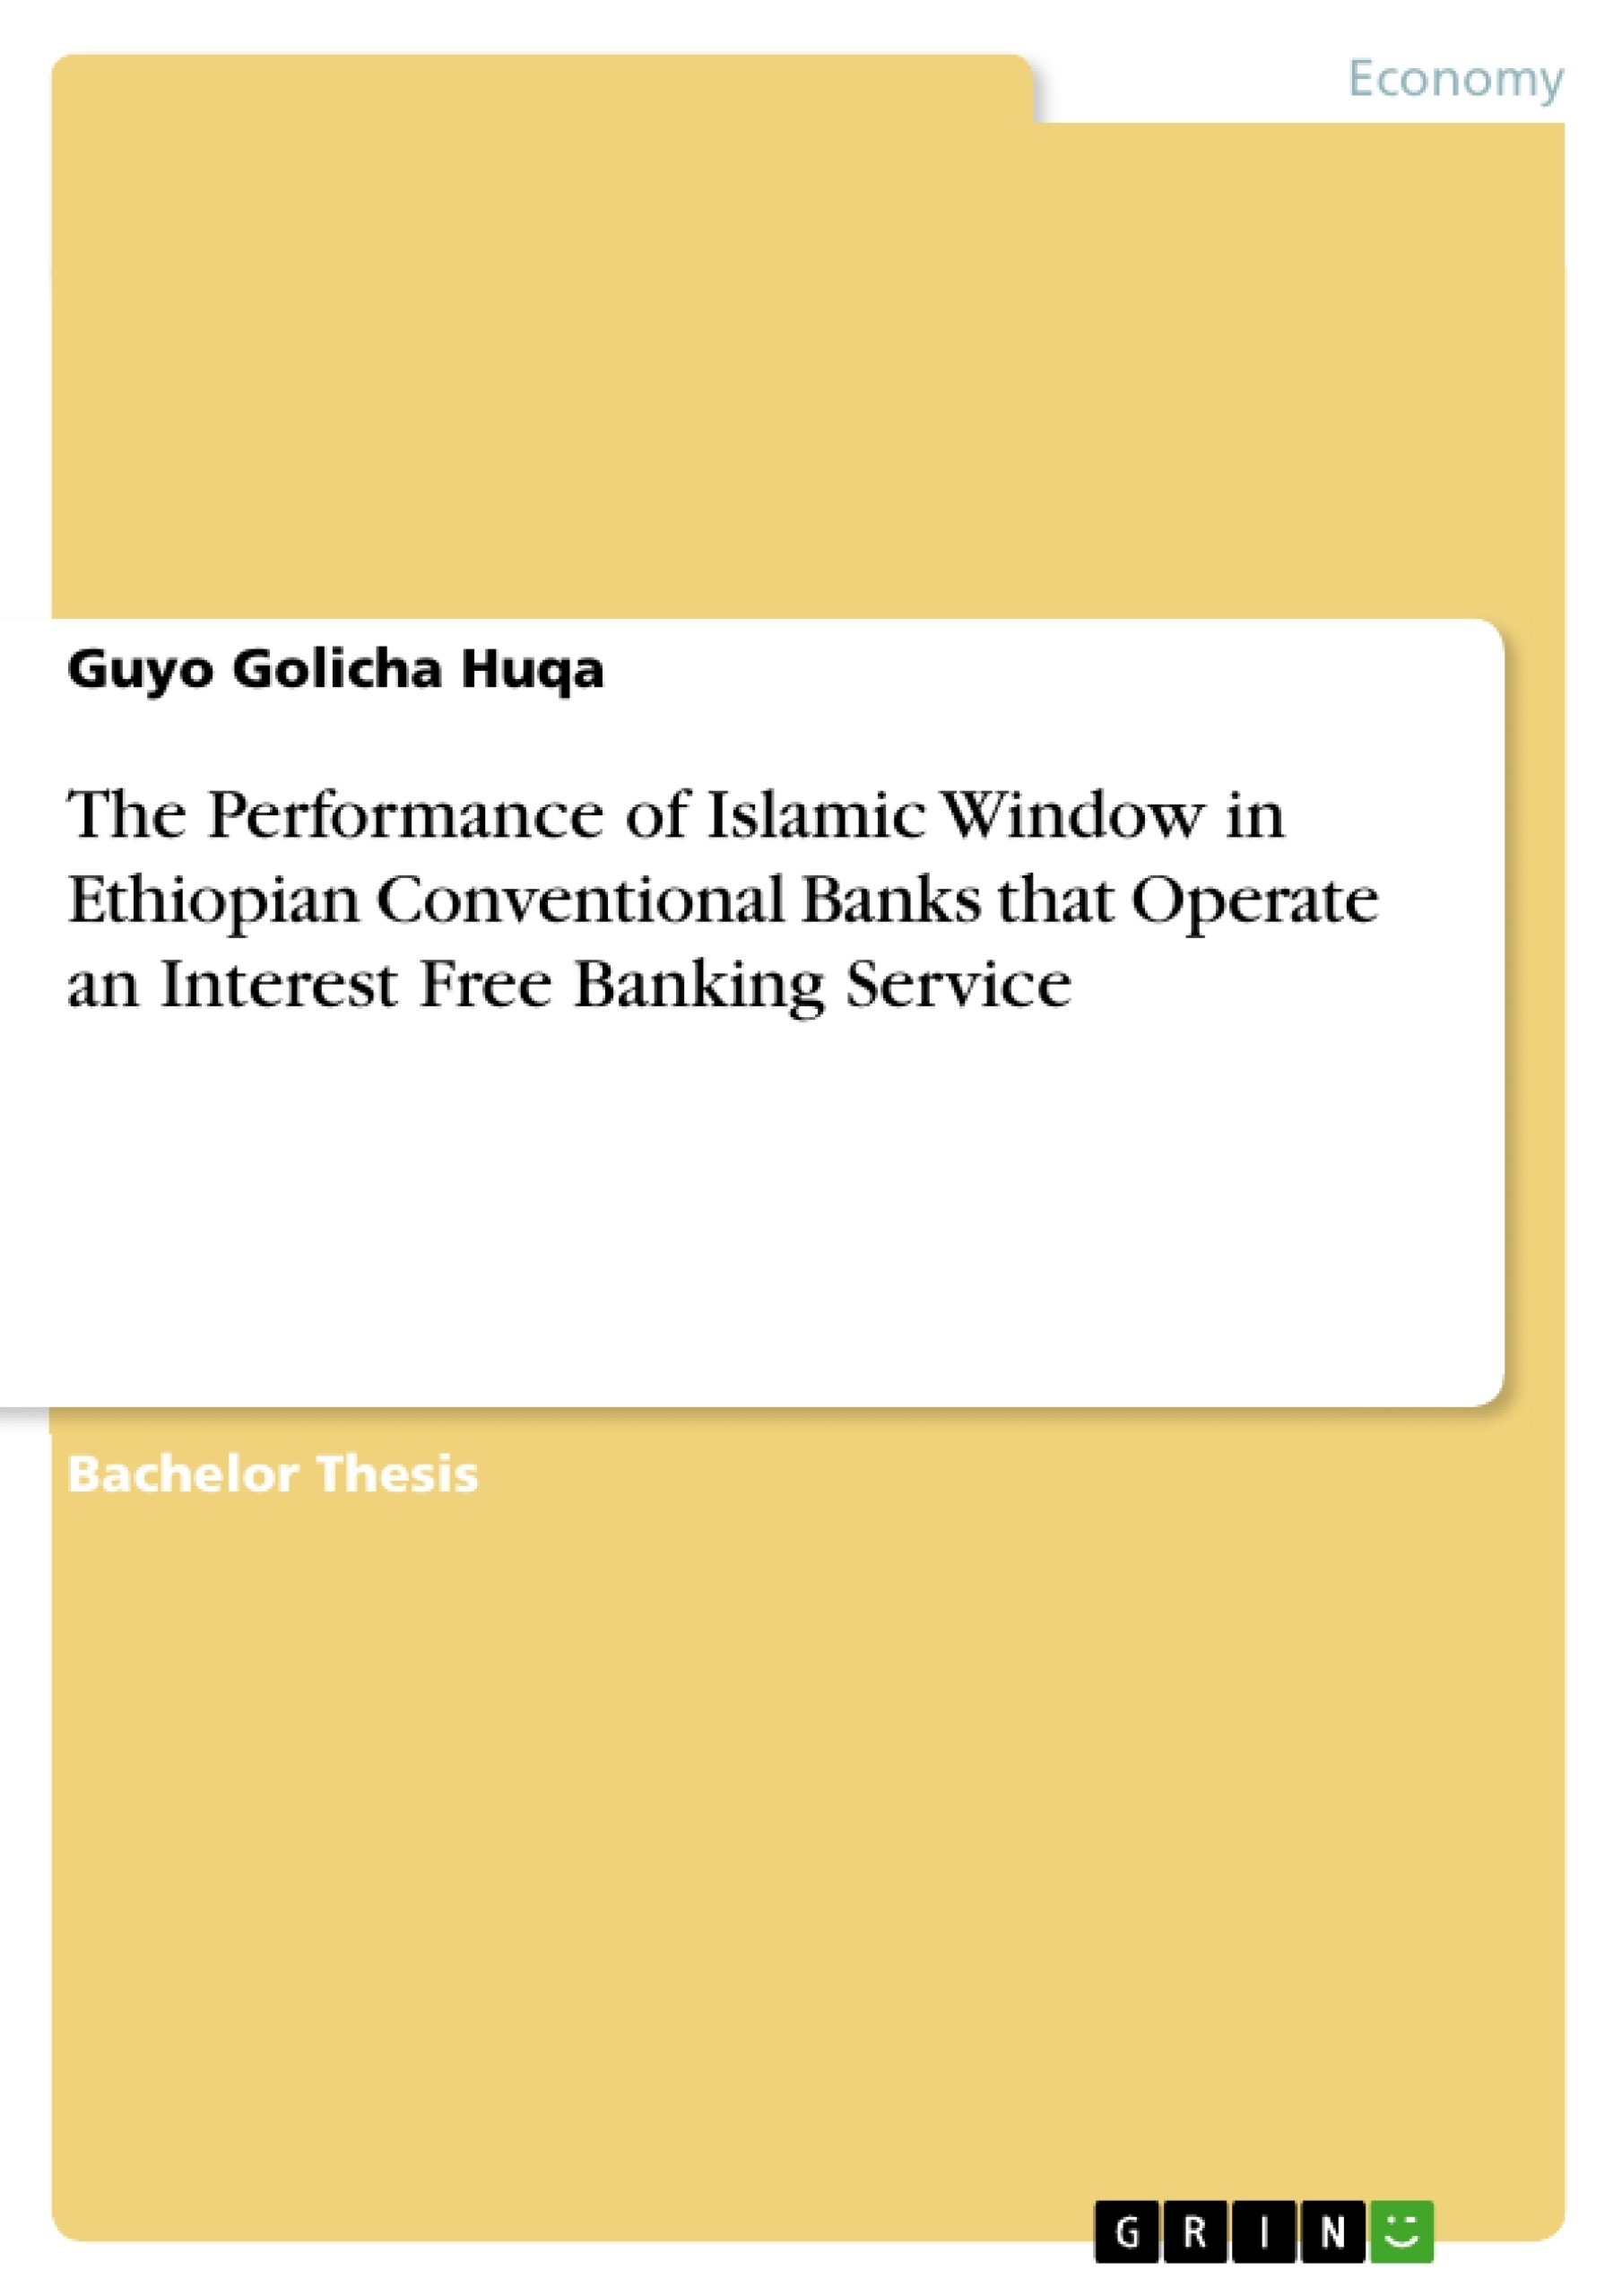 Title: The Performance of Islamic Window in Ethiopian Conventional Banks that Operate an Interest Free Banking Service